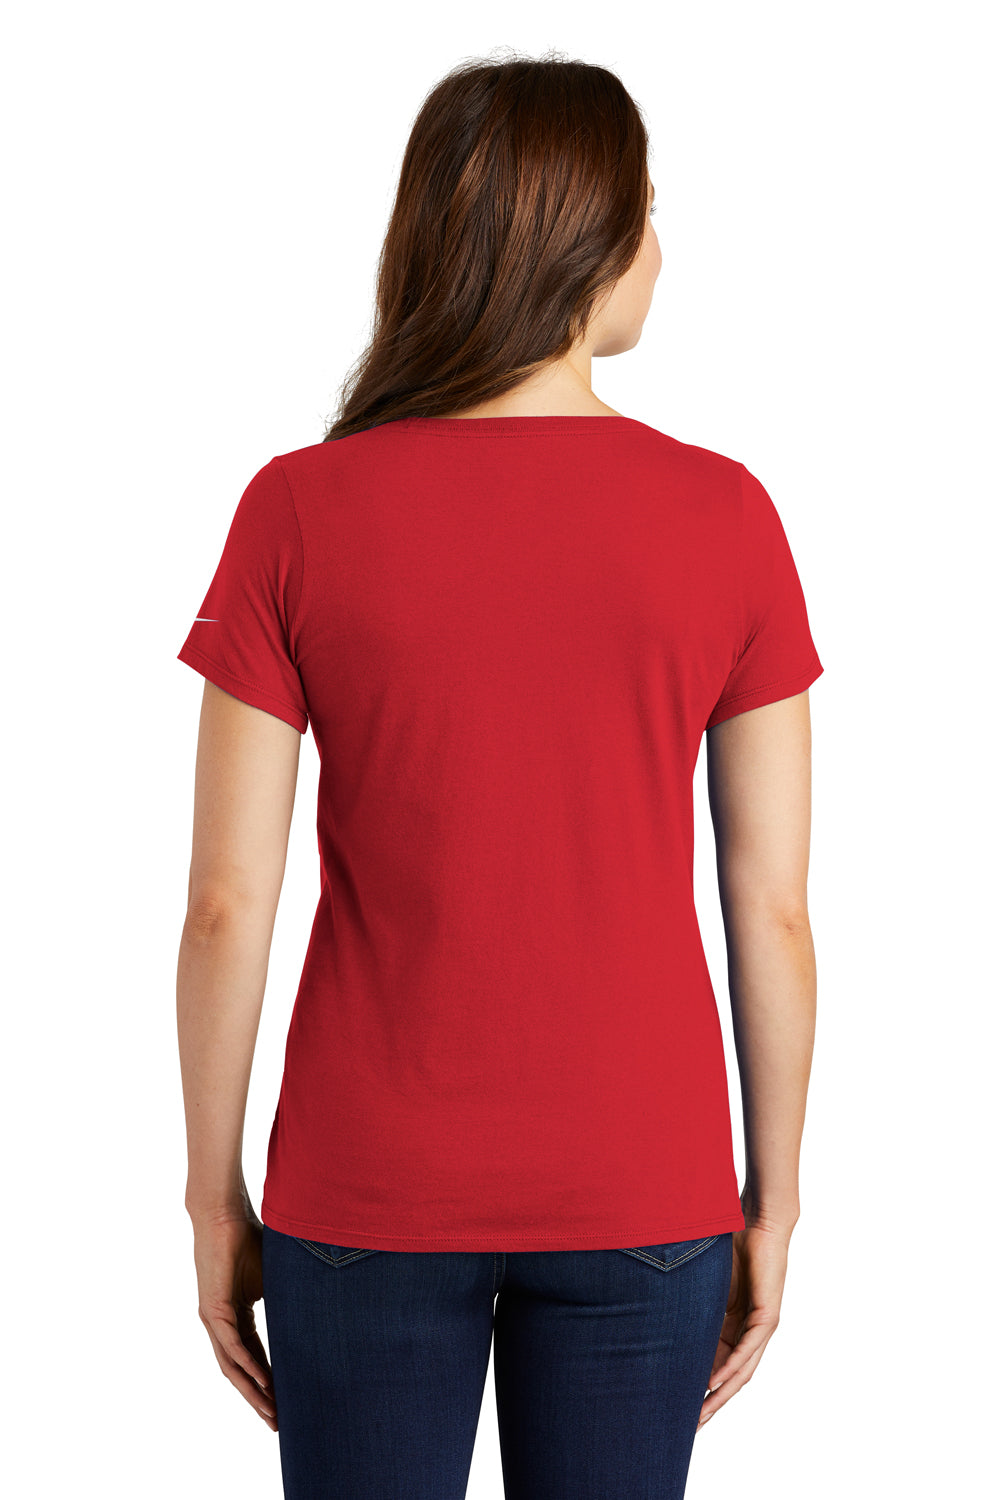 Nike NKBQ5236 Womens Core Short Sleeve Scoop Neck T-Shirt Gym Red Back